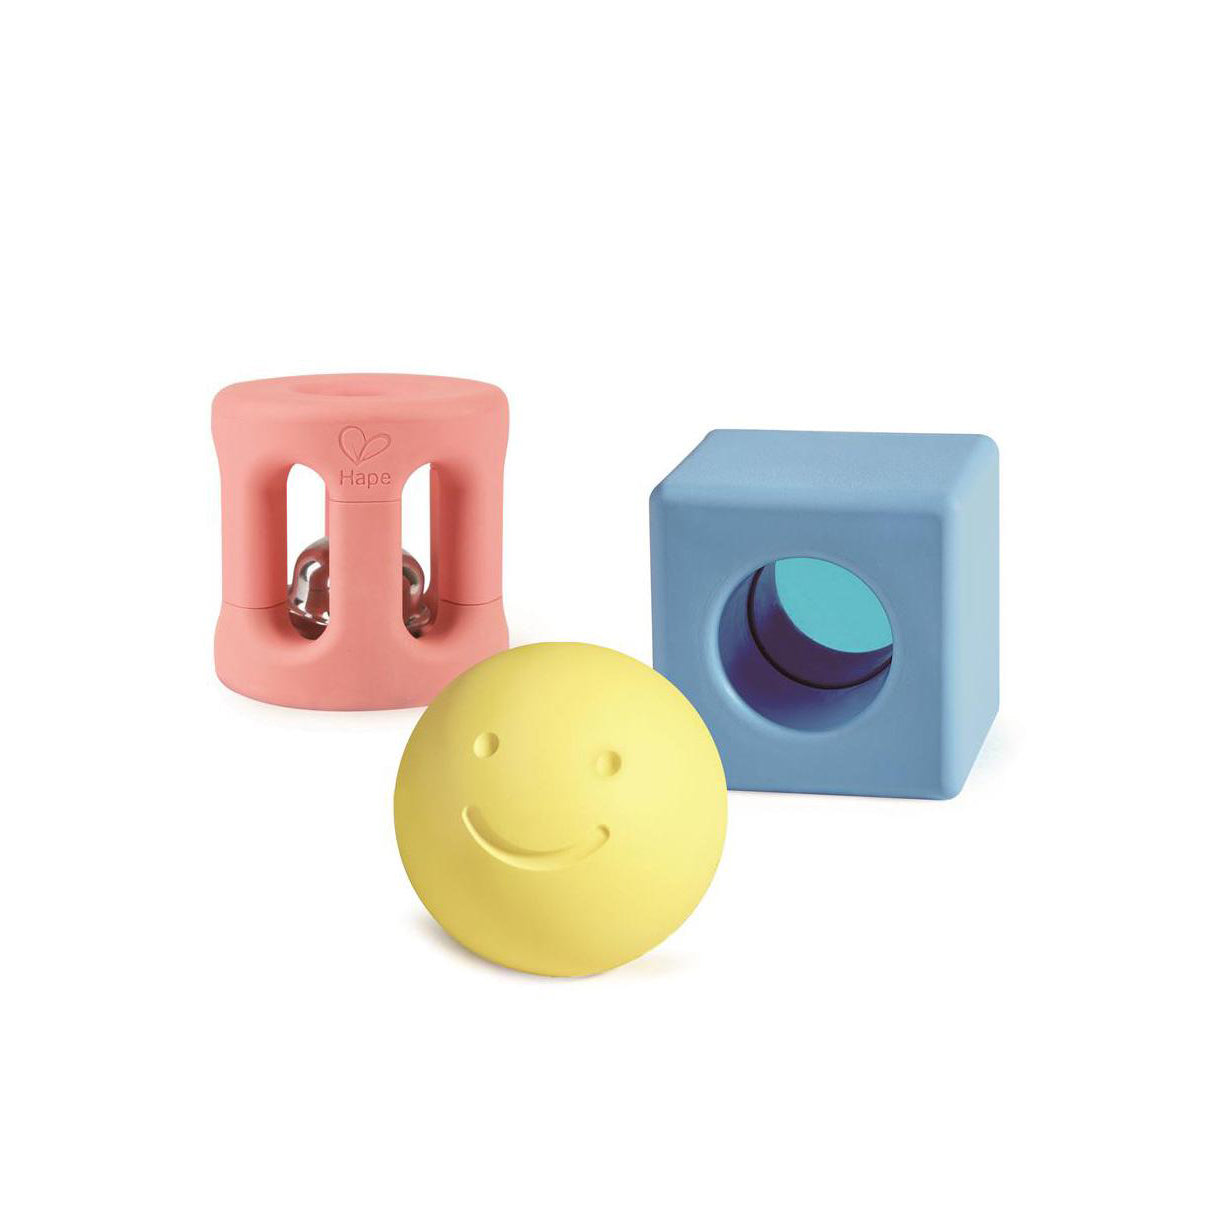 Geometric Smiley Twist and Turnables Rattles Set of 3